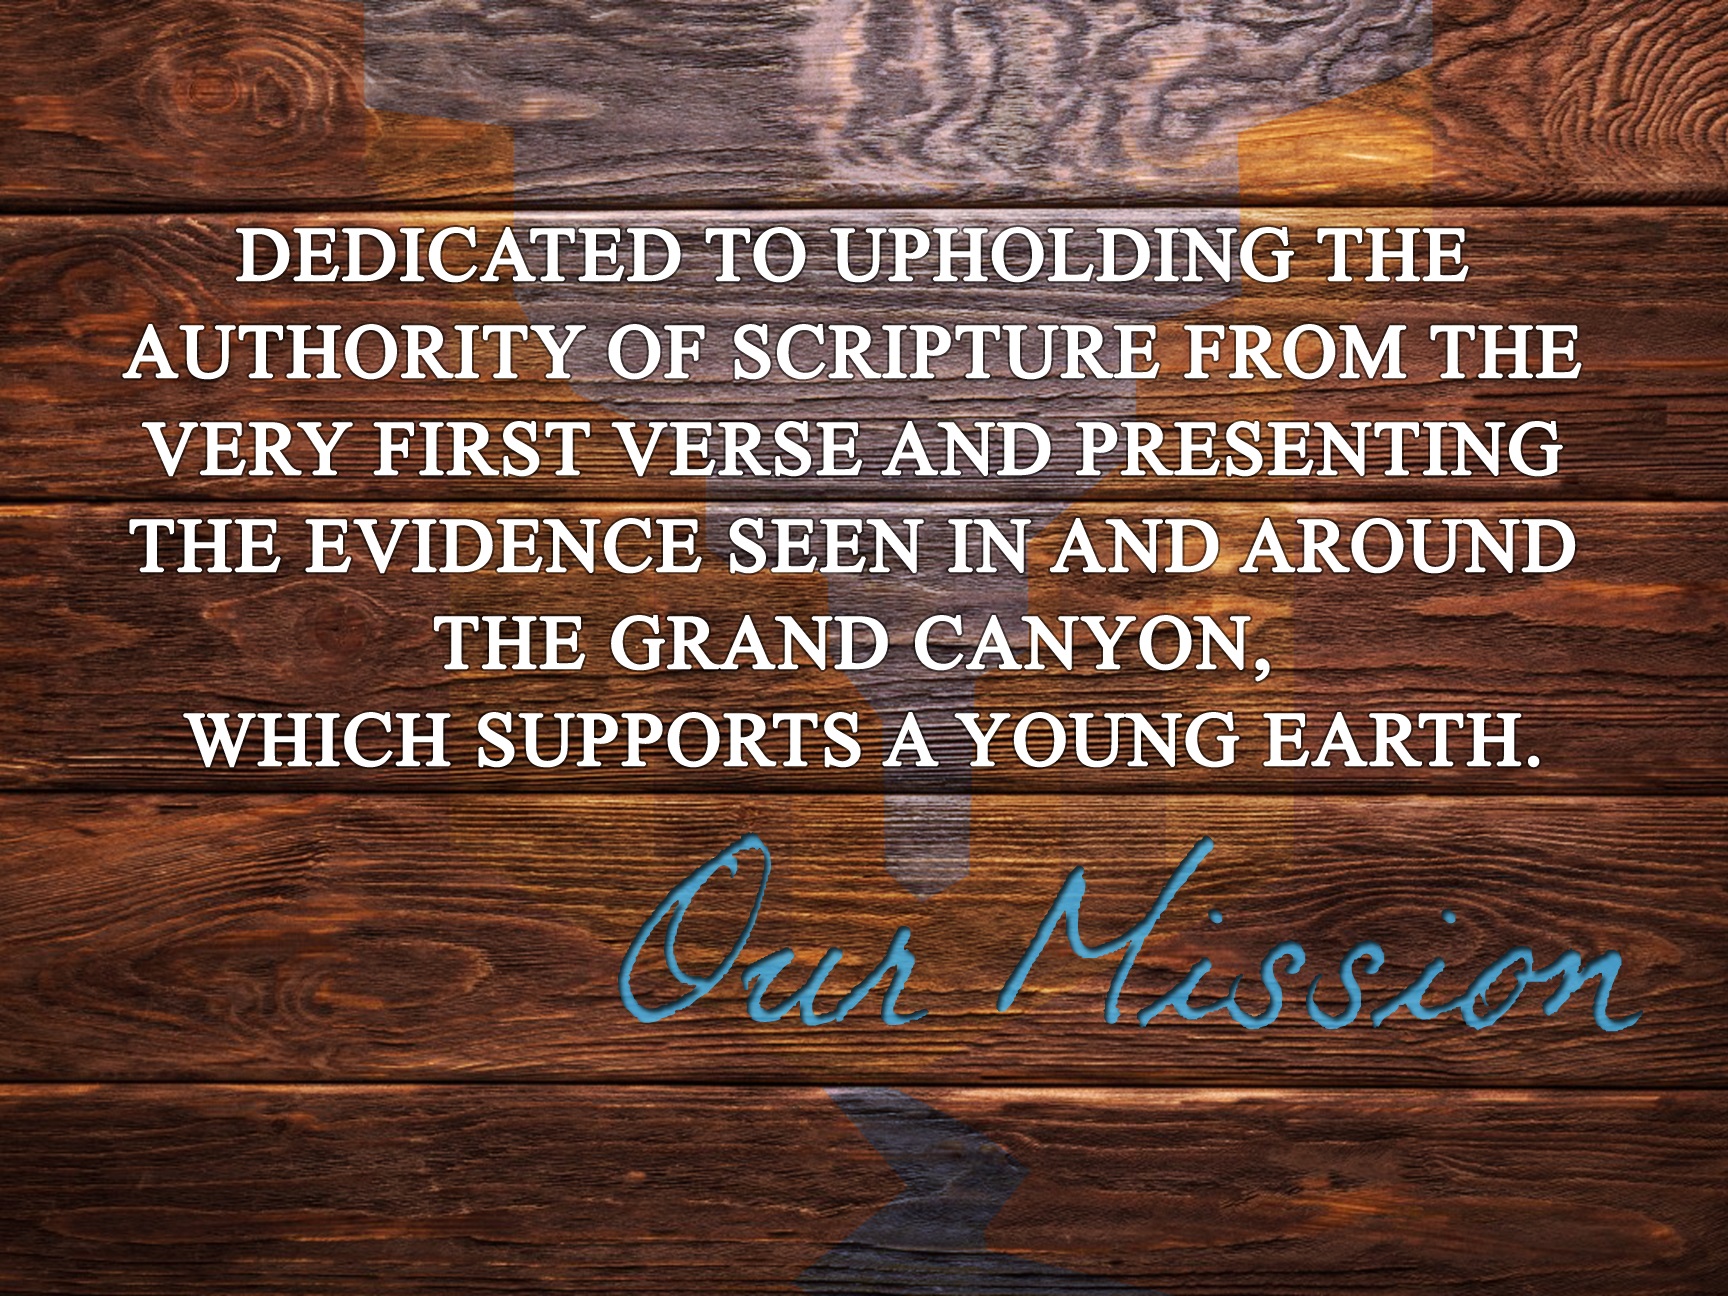 Canyon Ministries Mission Statement